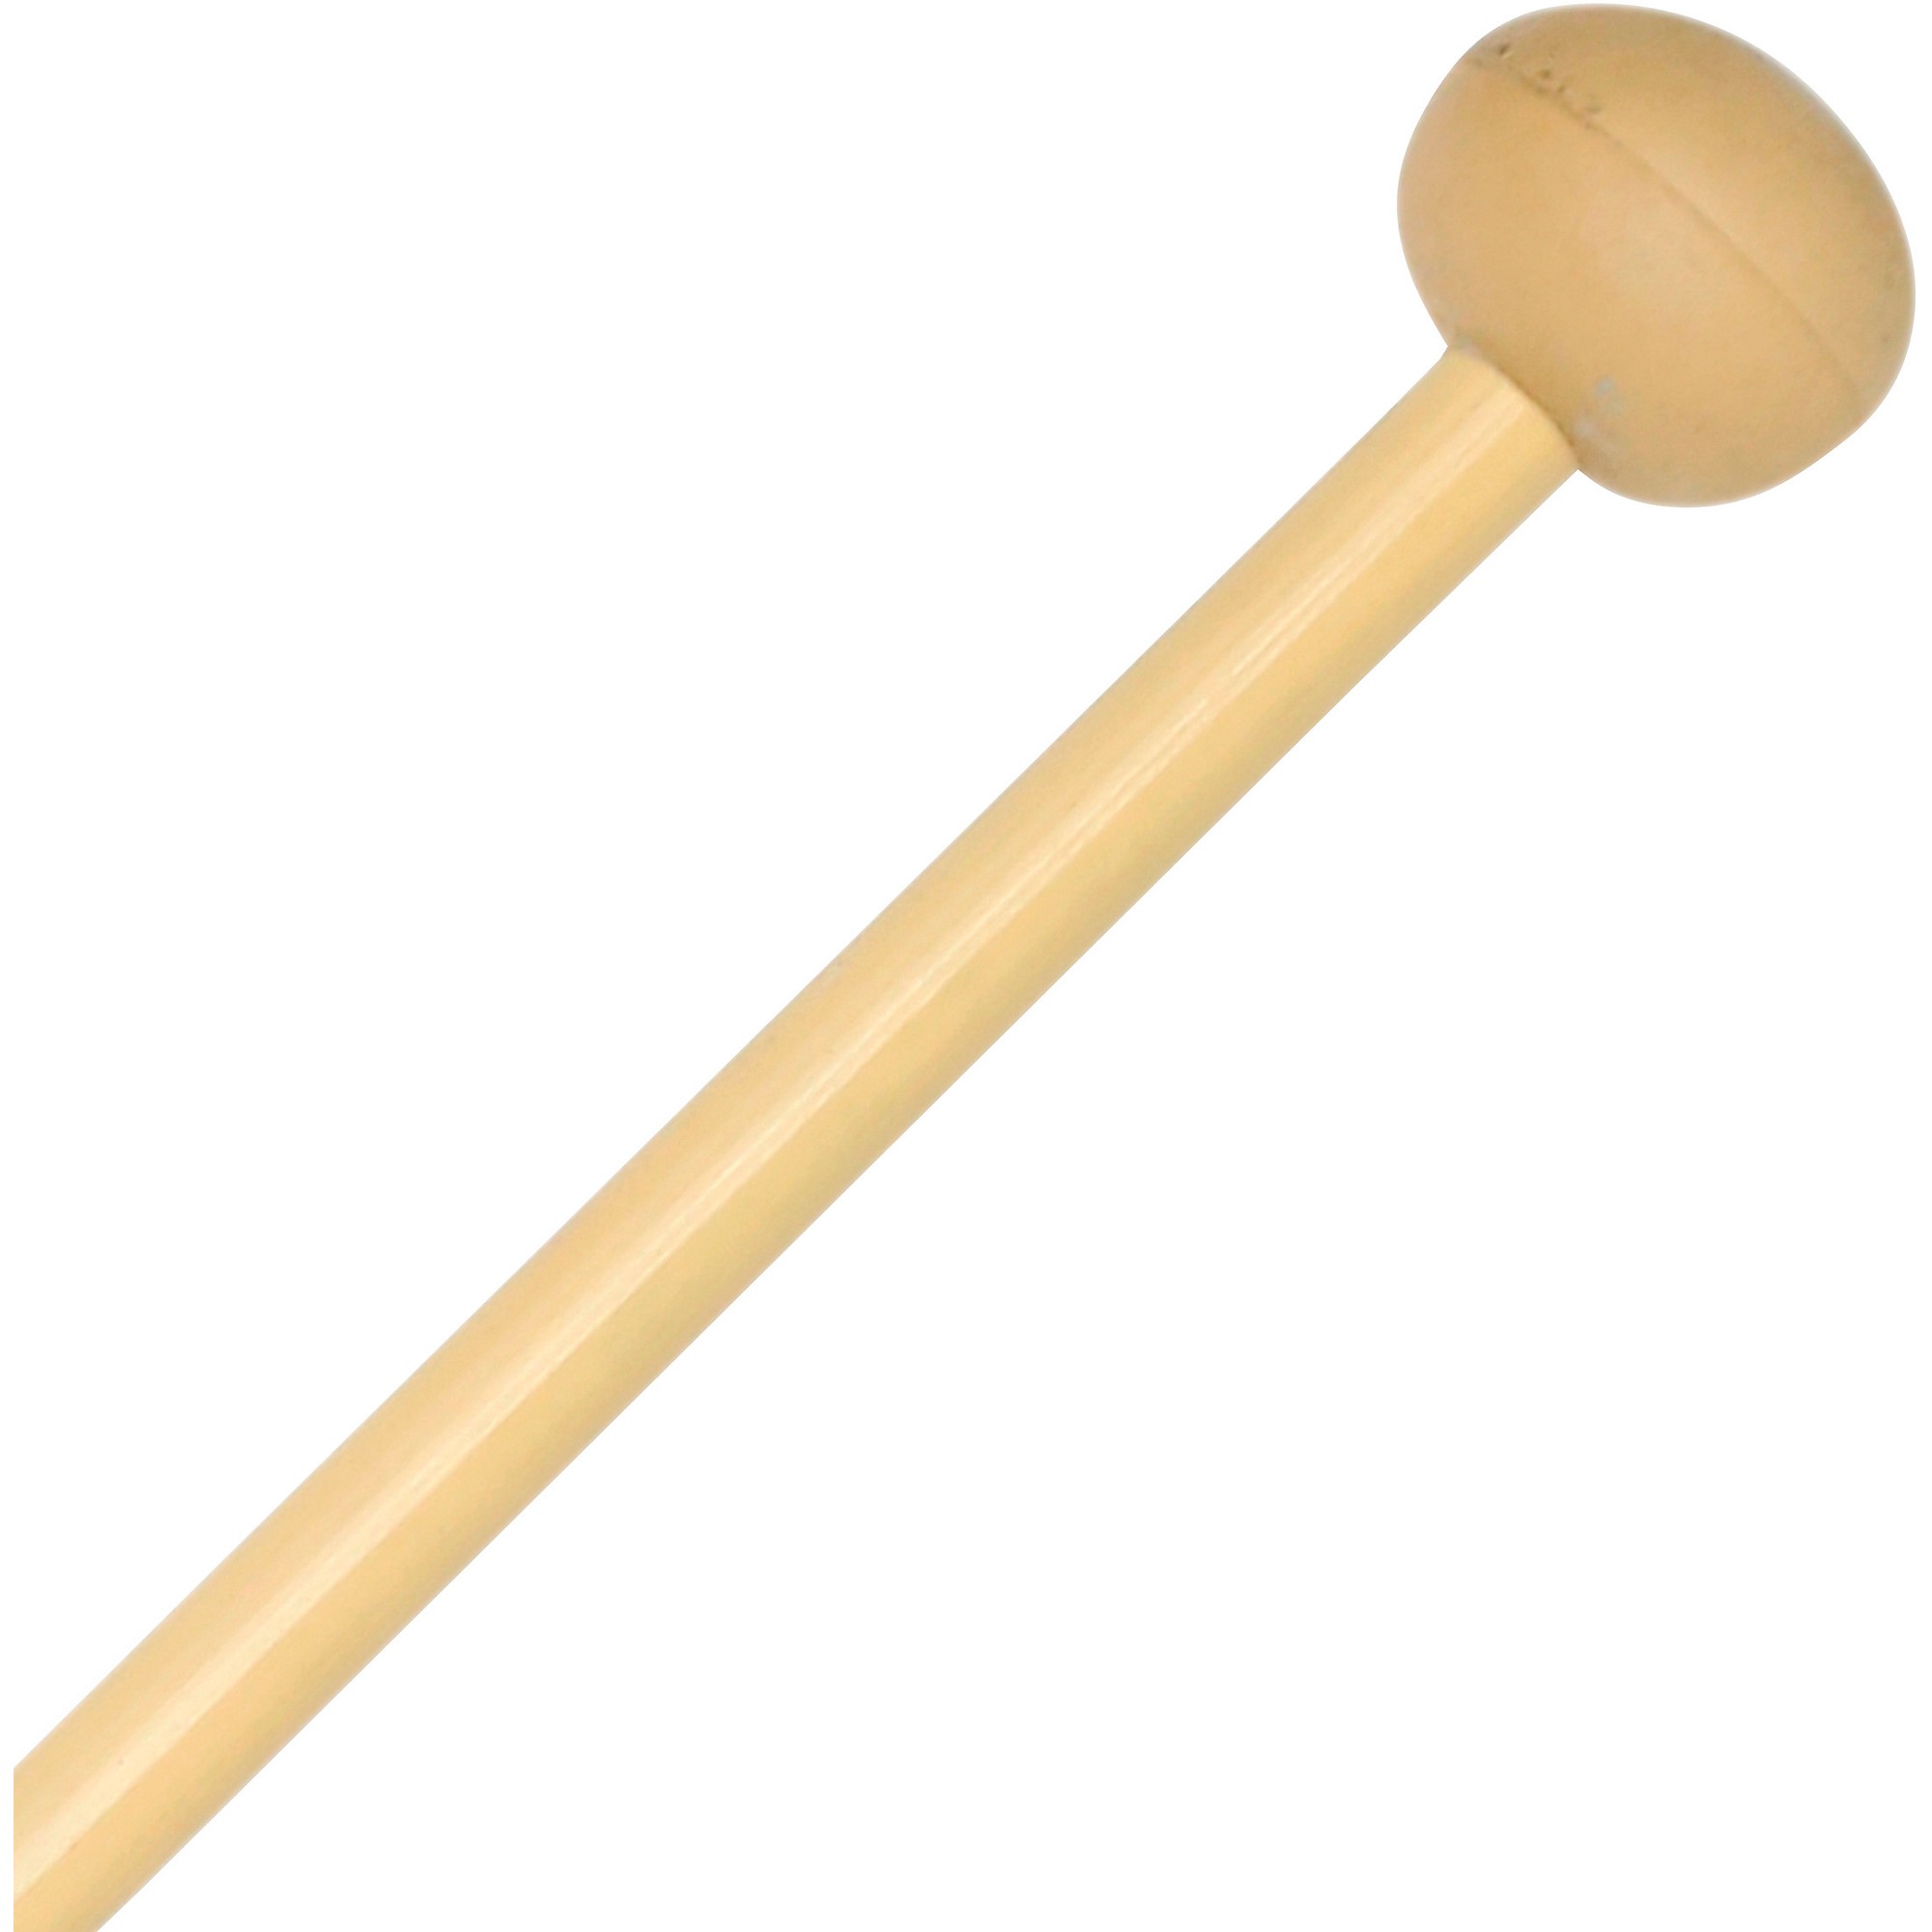 Articulate Series Keyboard Mallet - Hard Rubber, Round 1 1/4 – Vic Firth